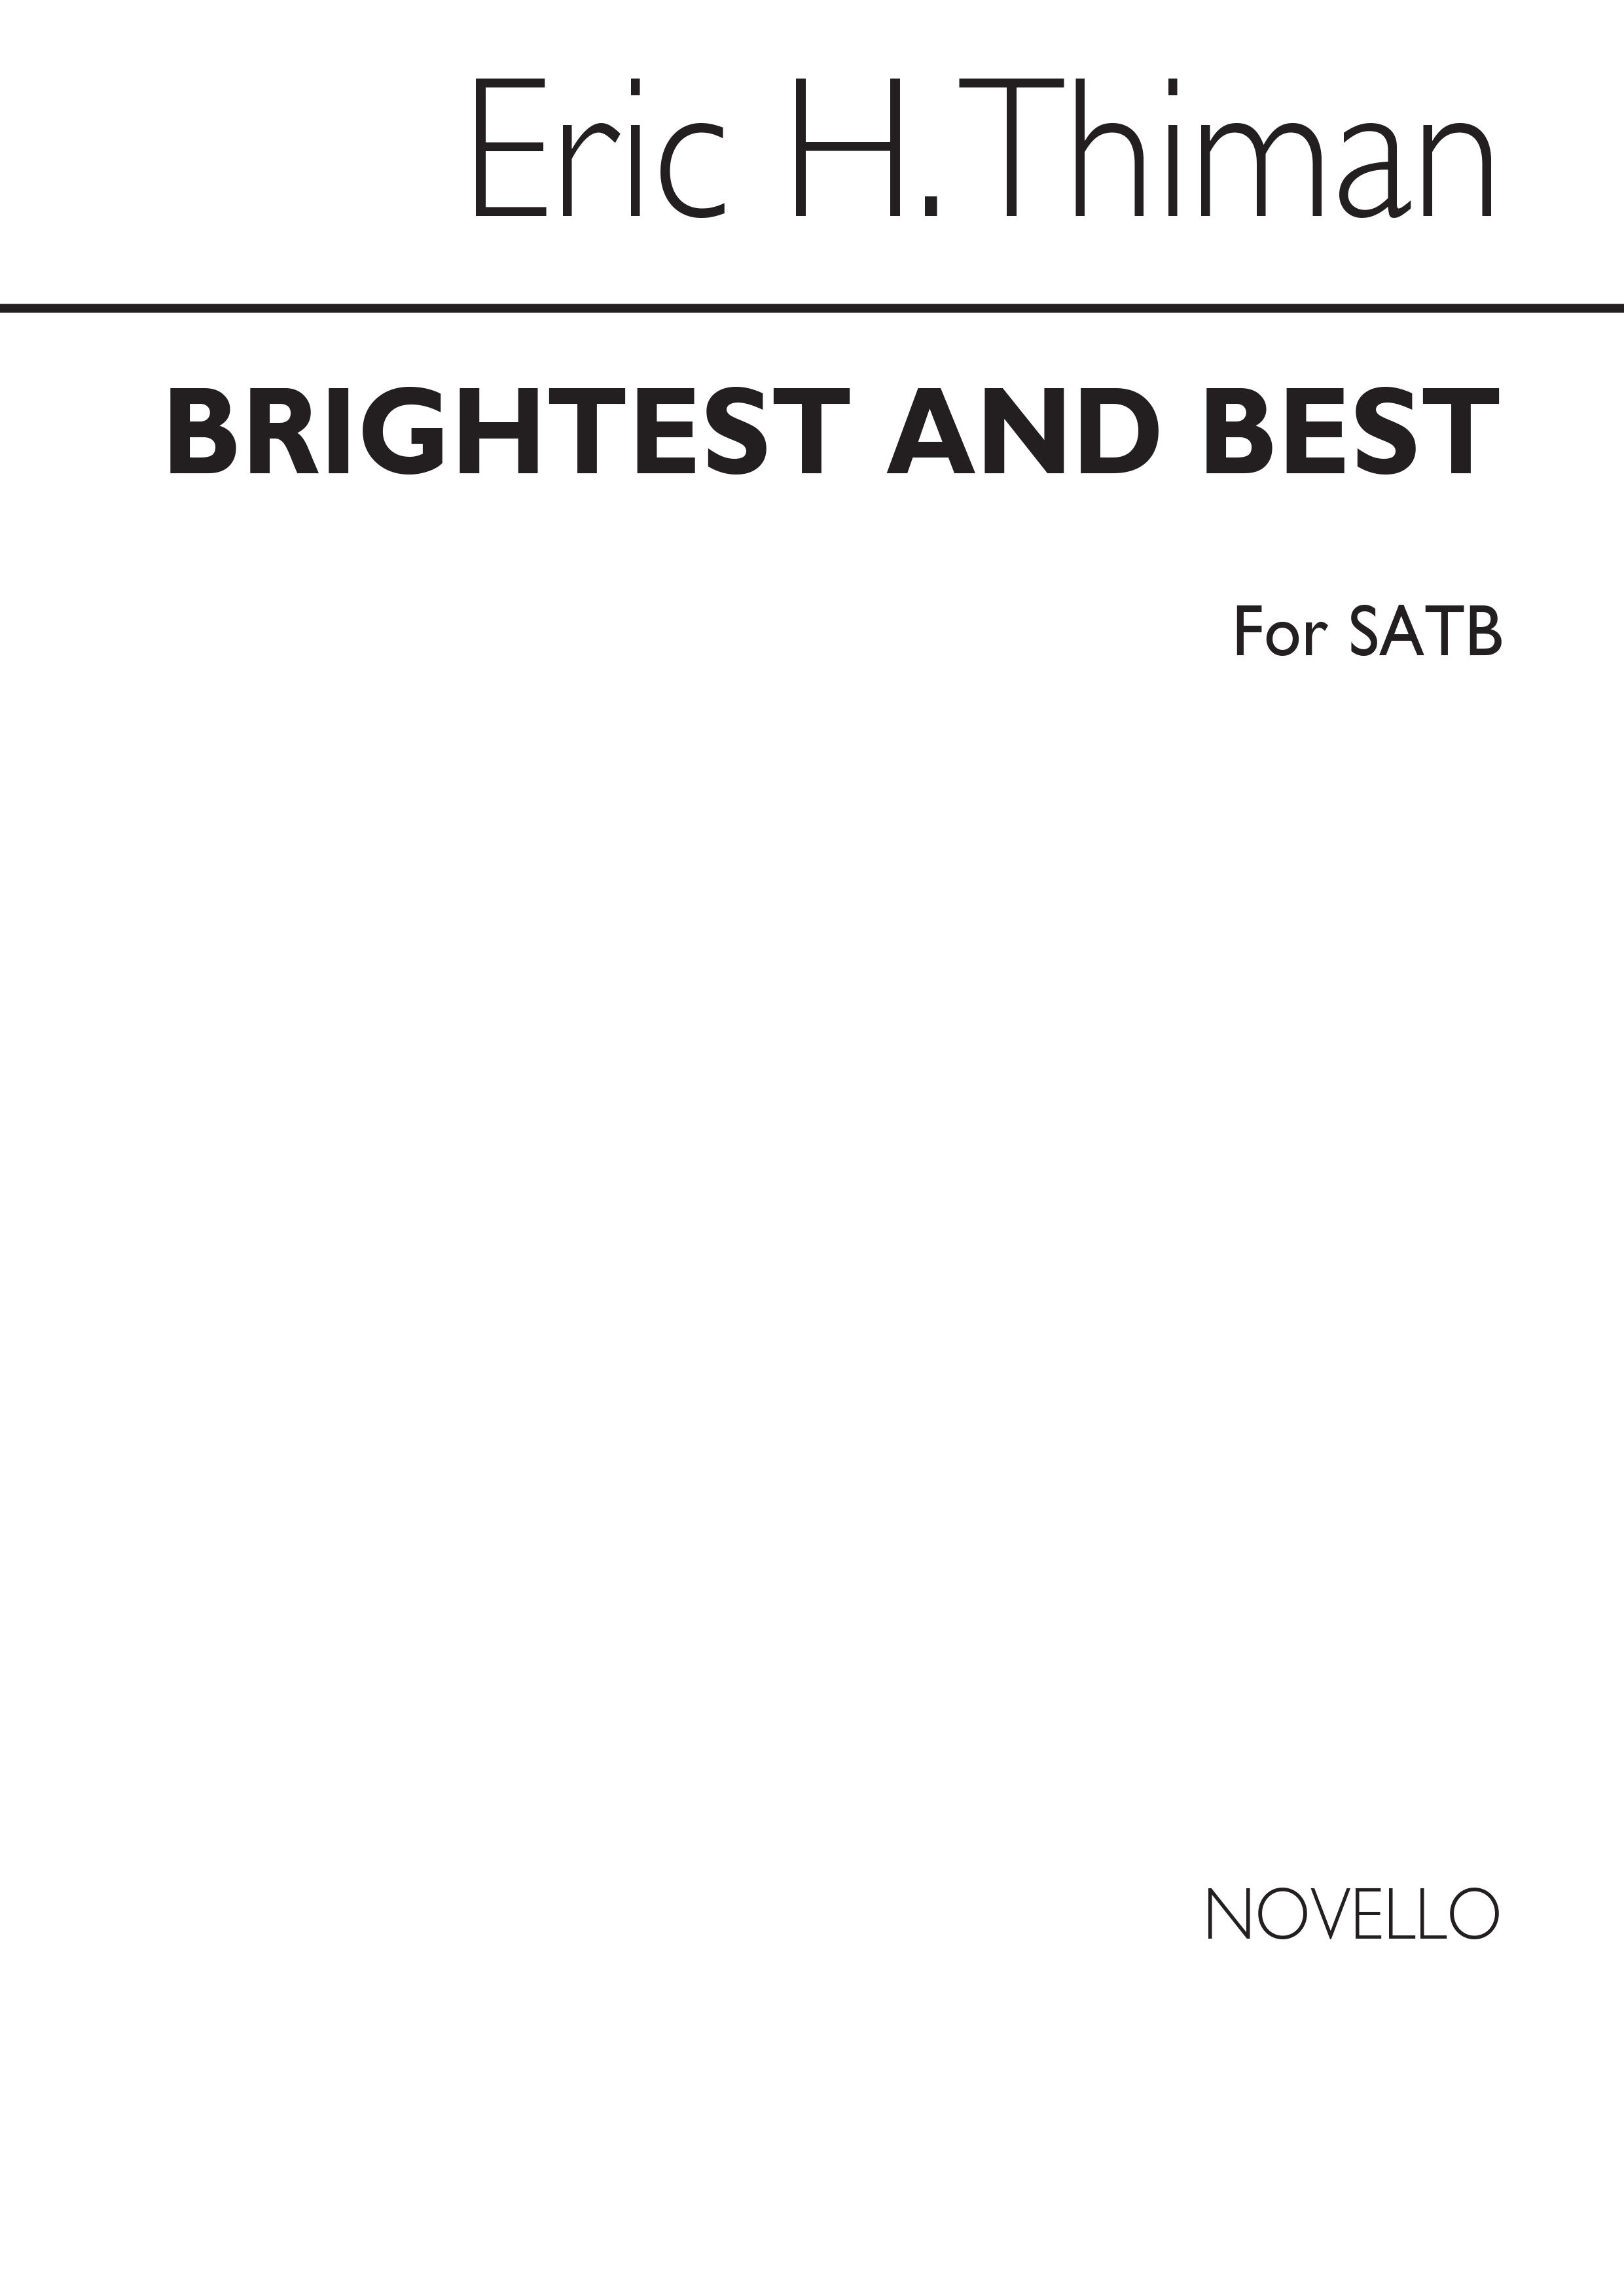 Thiman: Brightest And Best for SATB Chorus